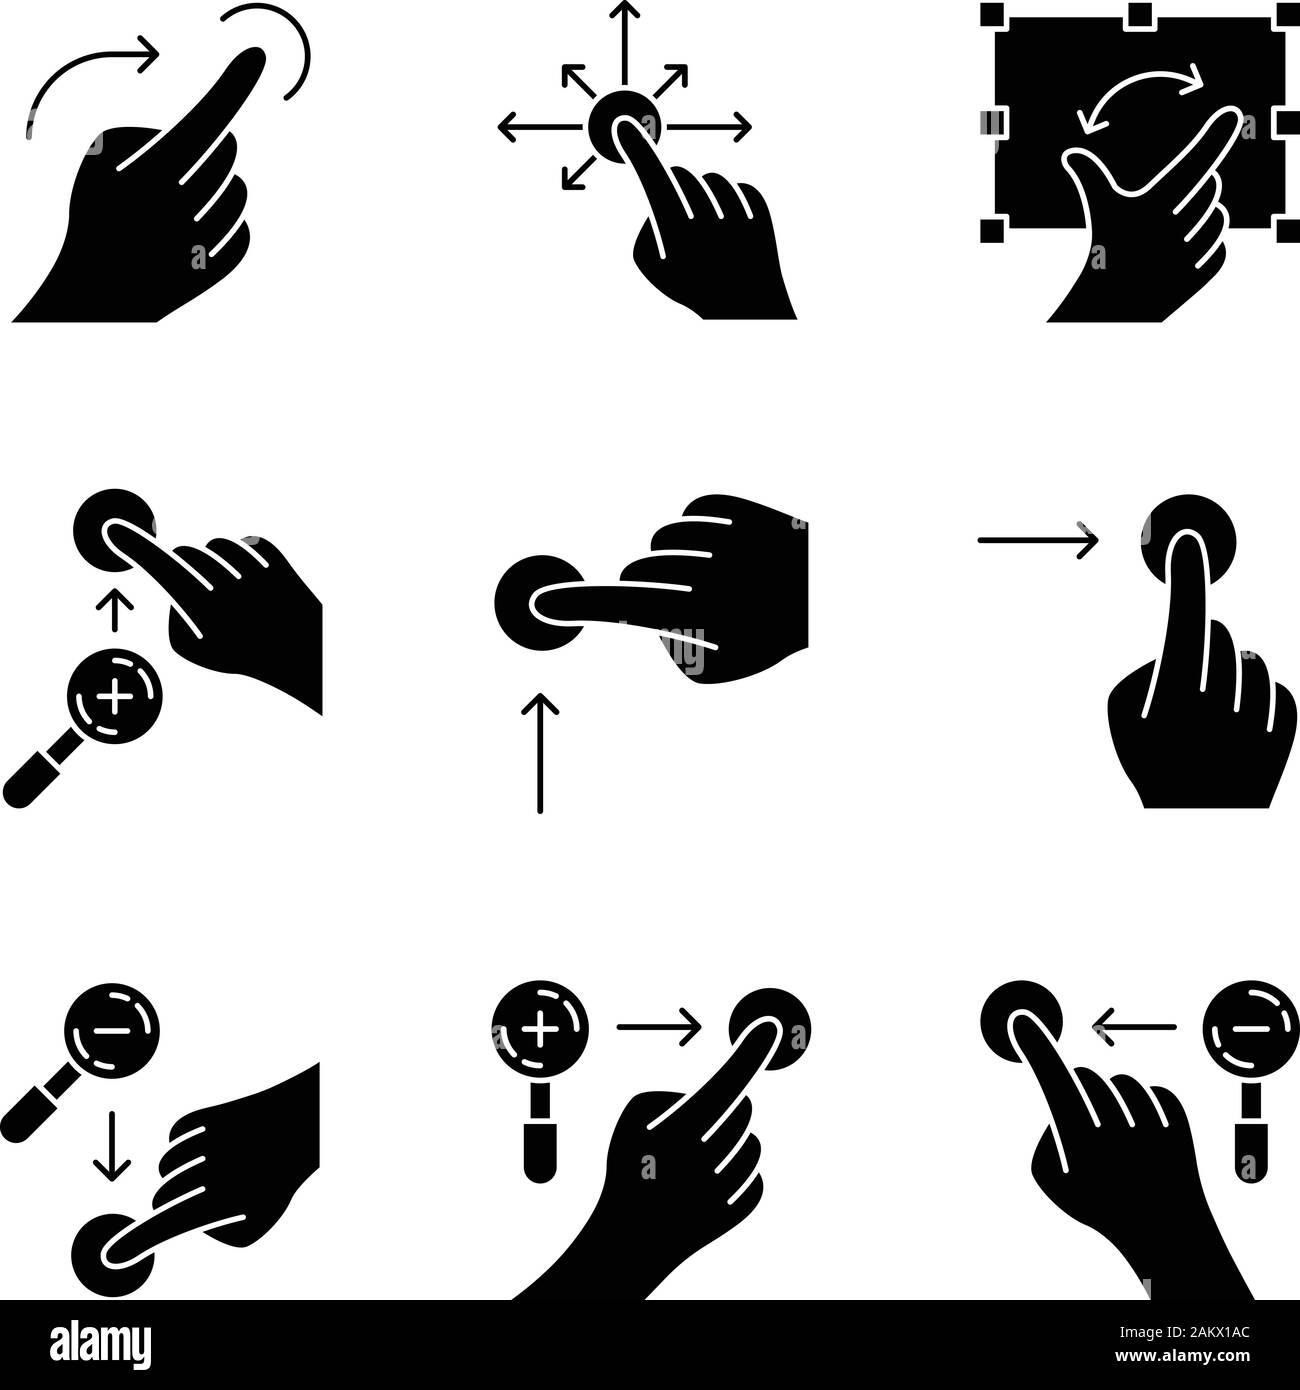 Touchscreen gestures glyph icons set. Vertical scroll up, horizontal scroll right. Zoom in vertical, zoom out horizontal. Drag finger all directions. Stock Vector